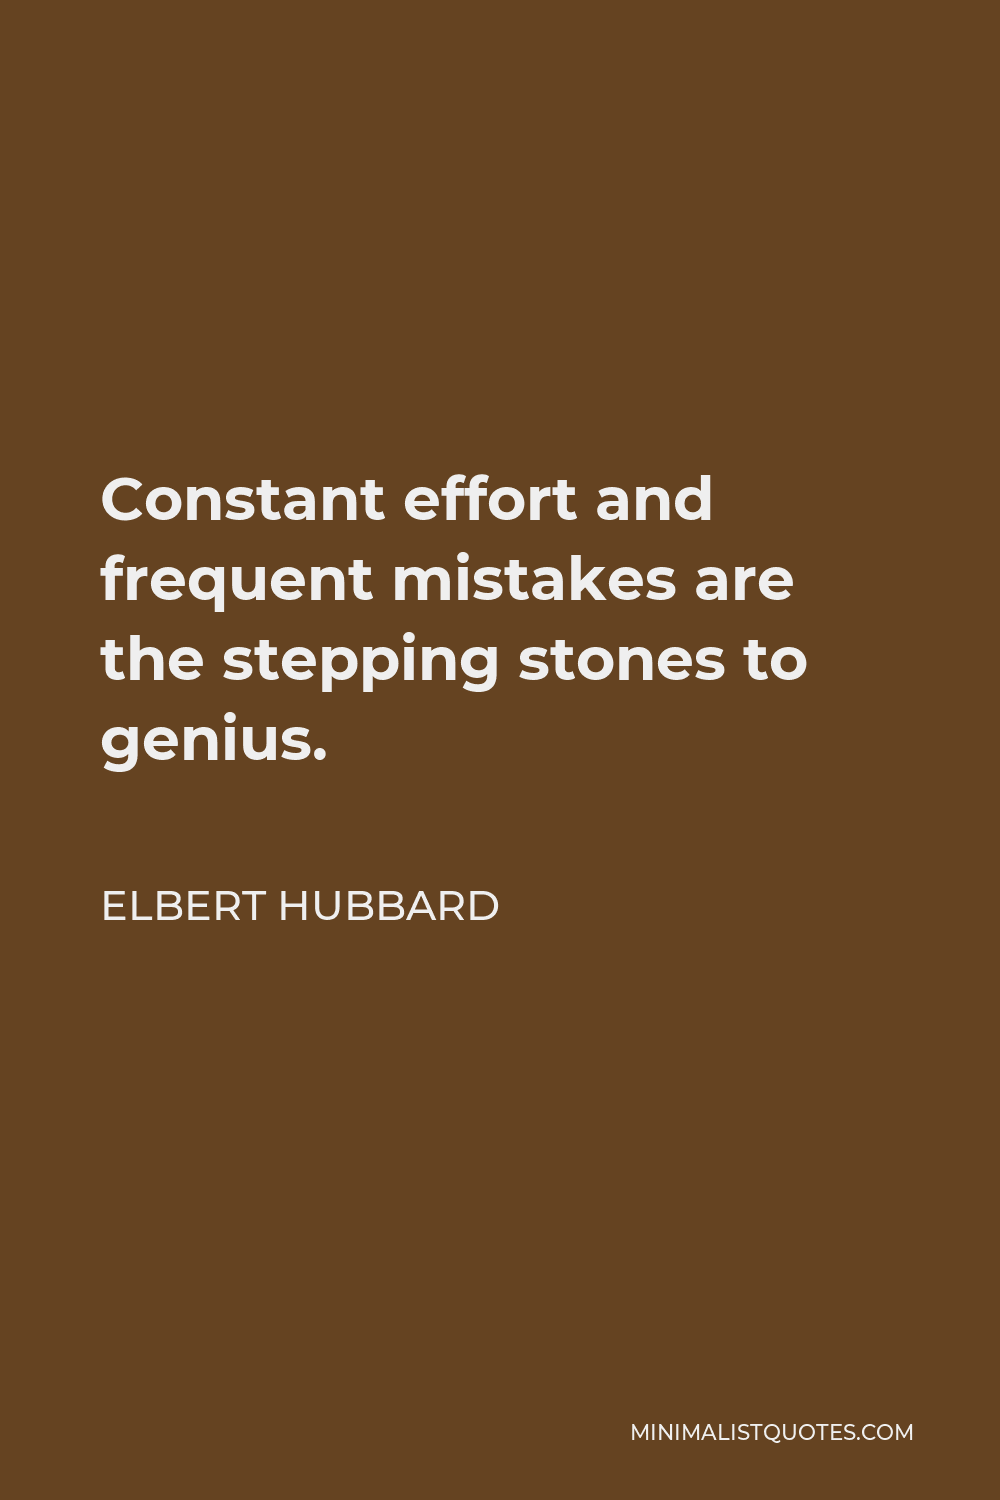 Elbert Hubbard Quote - Constant effort and frequent mistakes are the stepping stones to genius.